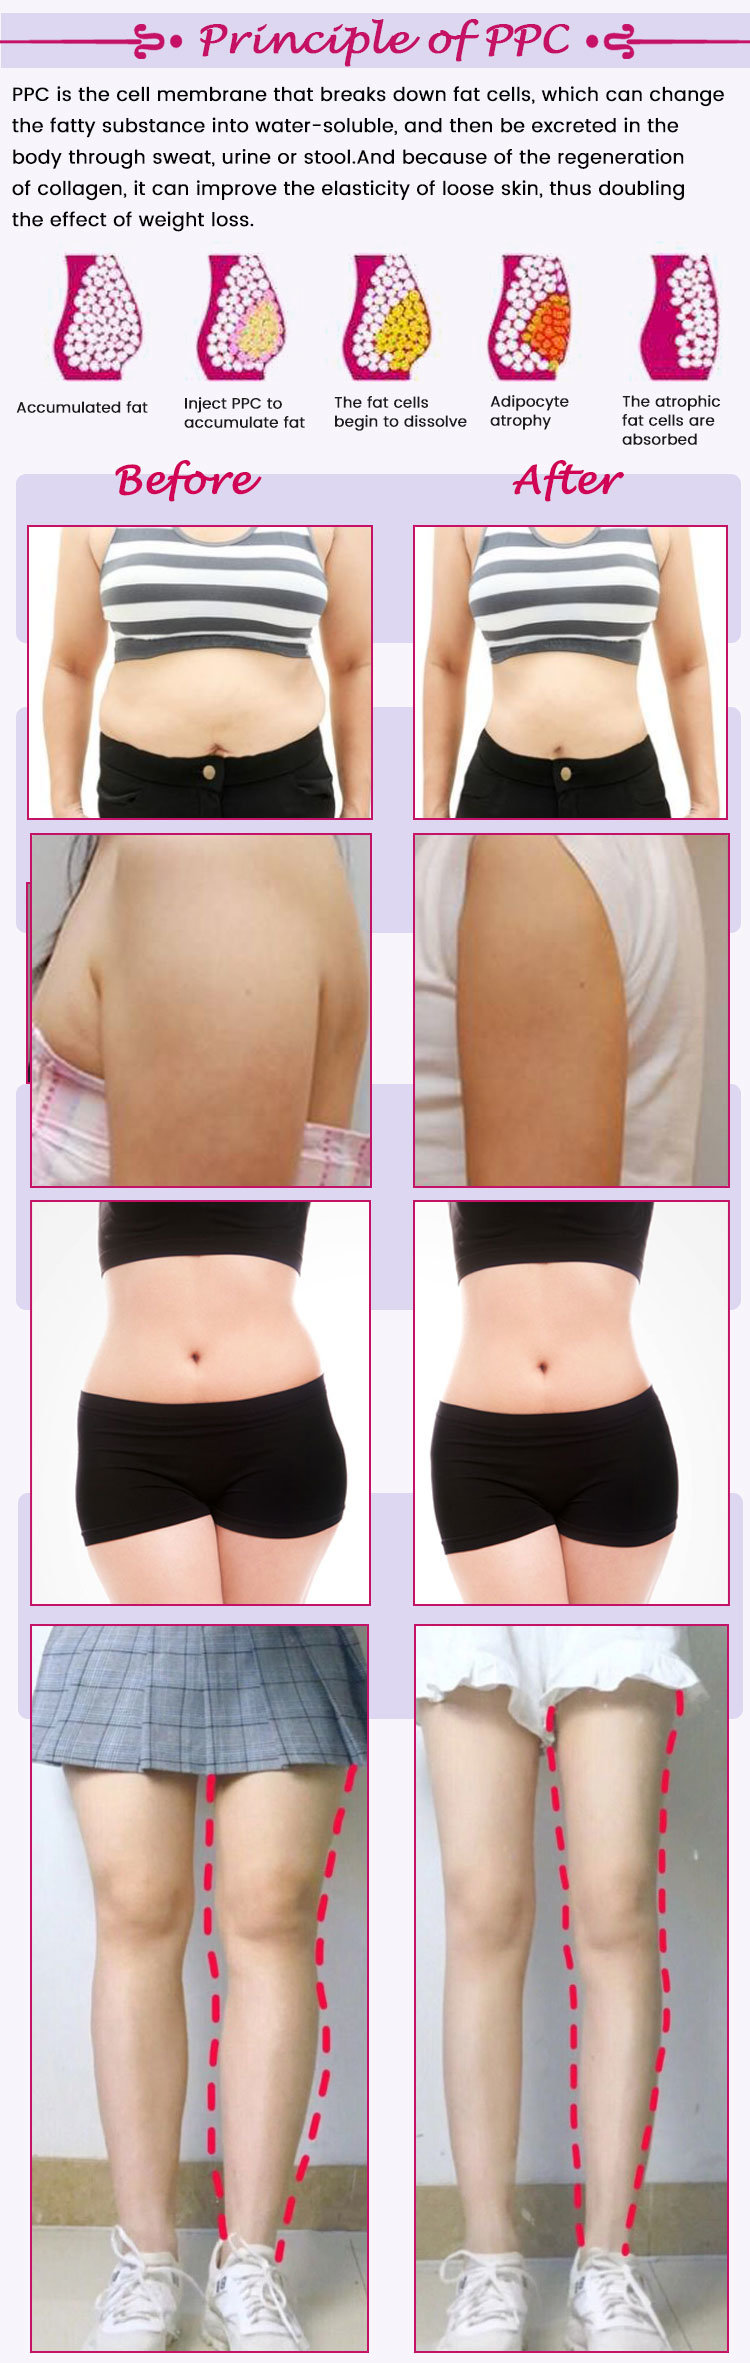 Korea Quality Lipolysis Weight Loss Injectable Red Solution Weight Loss Liquid Injections